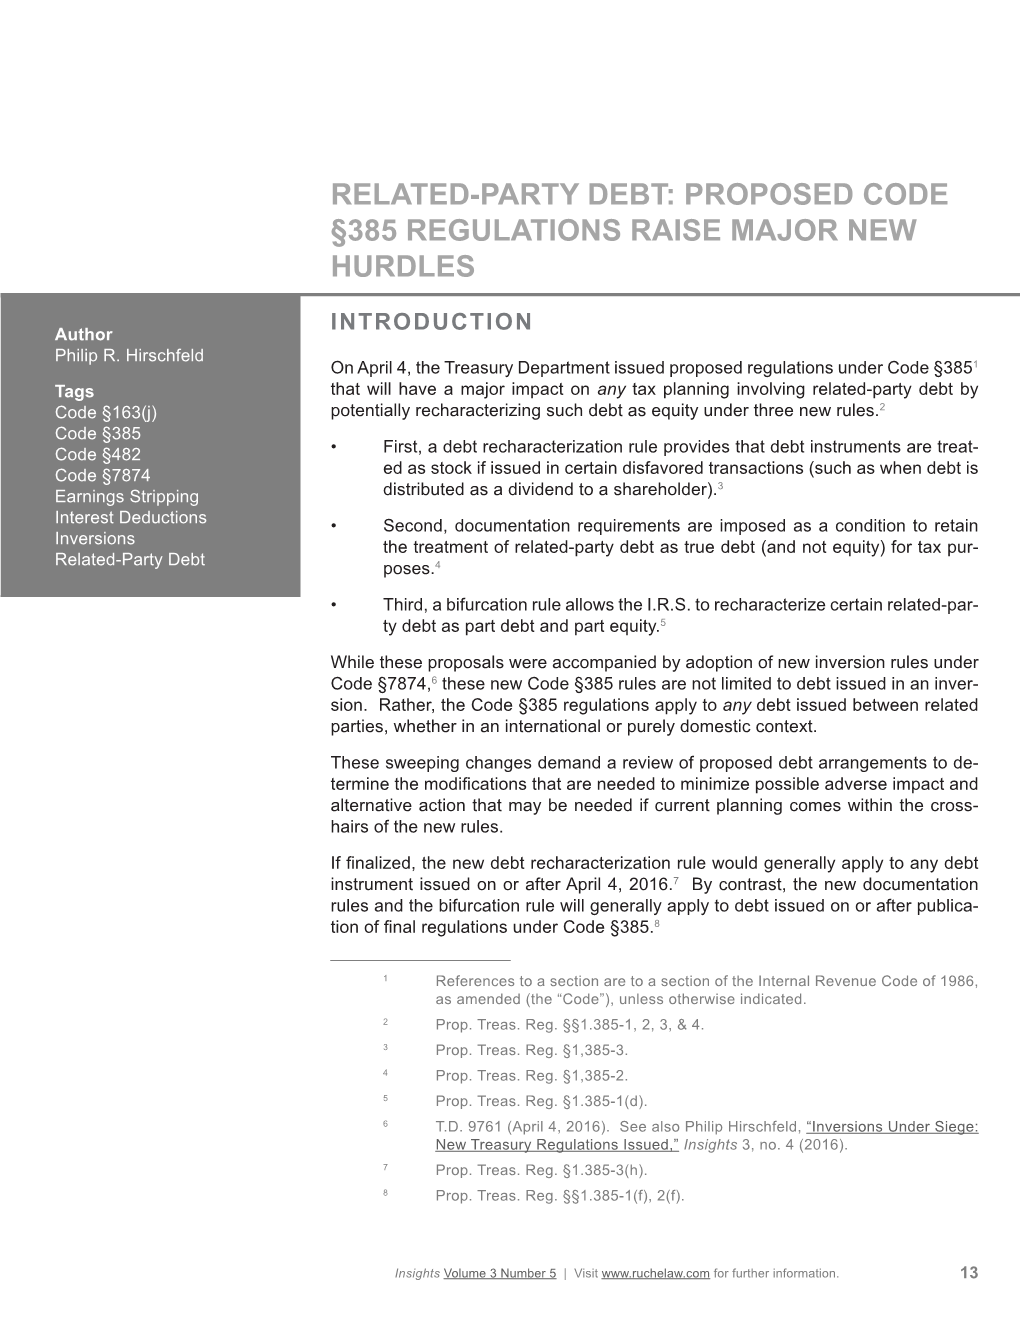 Related-Party Debt: Proposed §385 Regulations Raise Major New